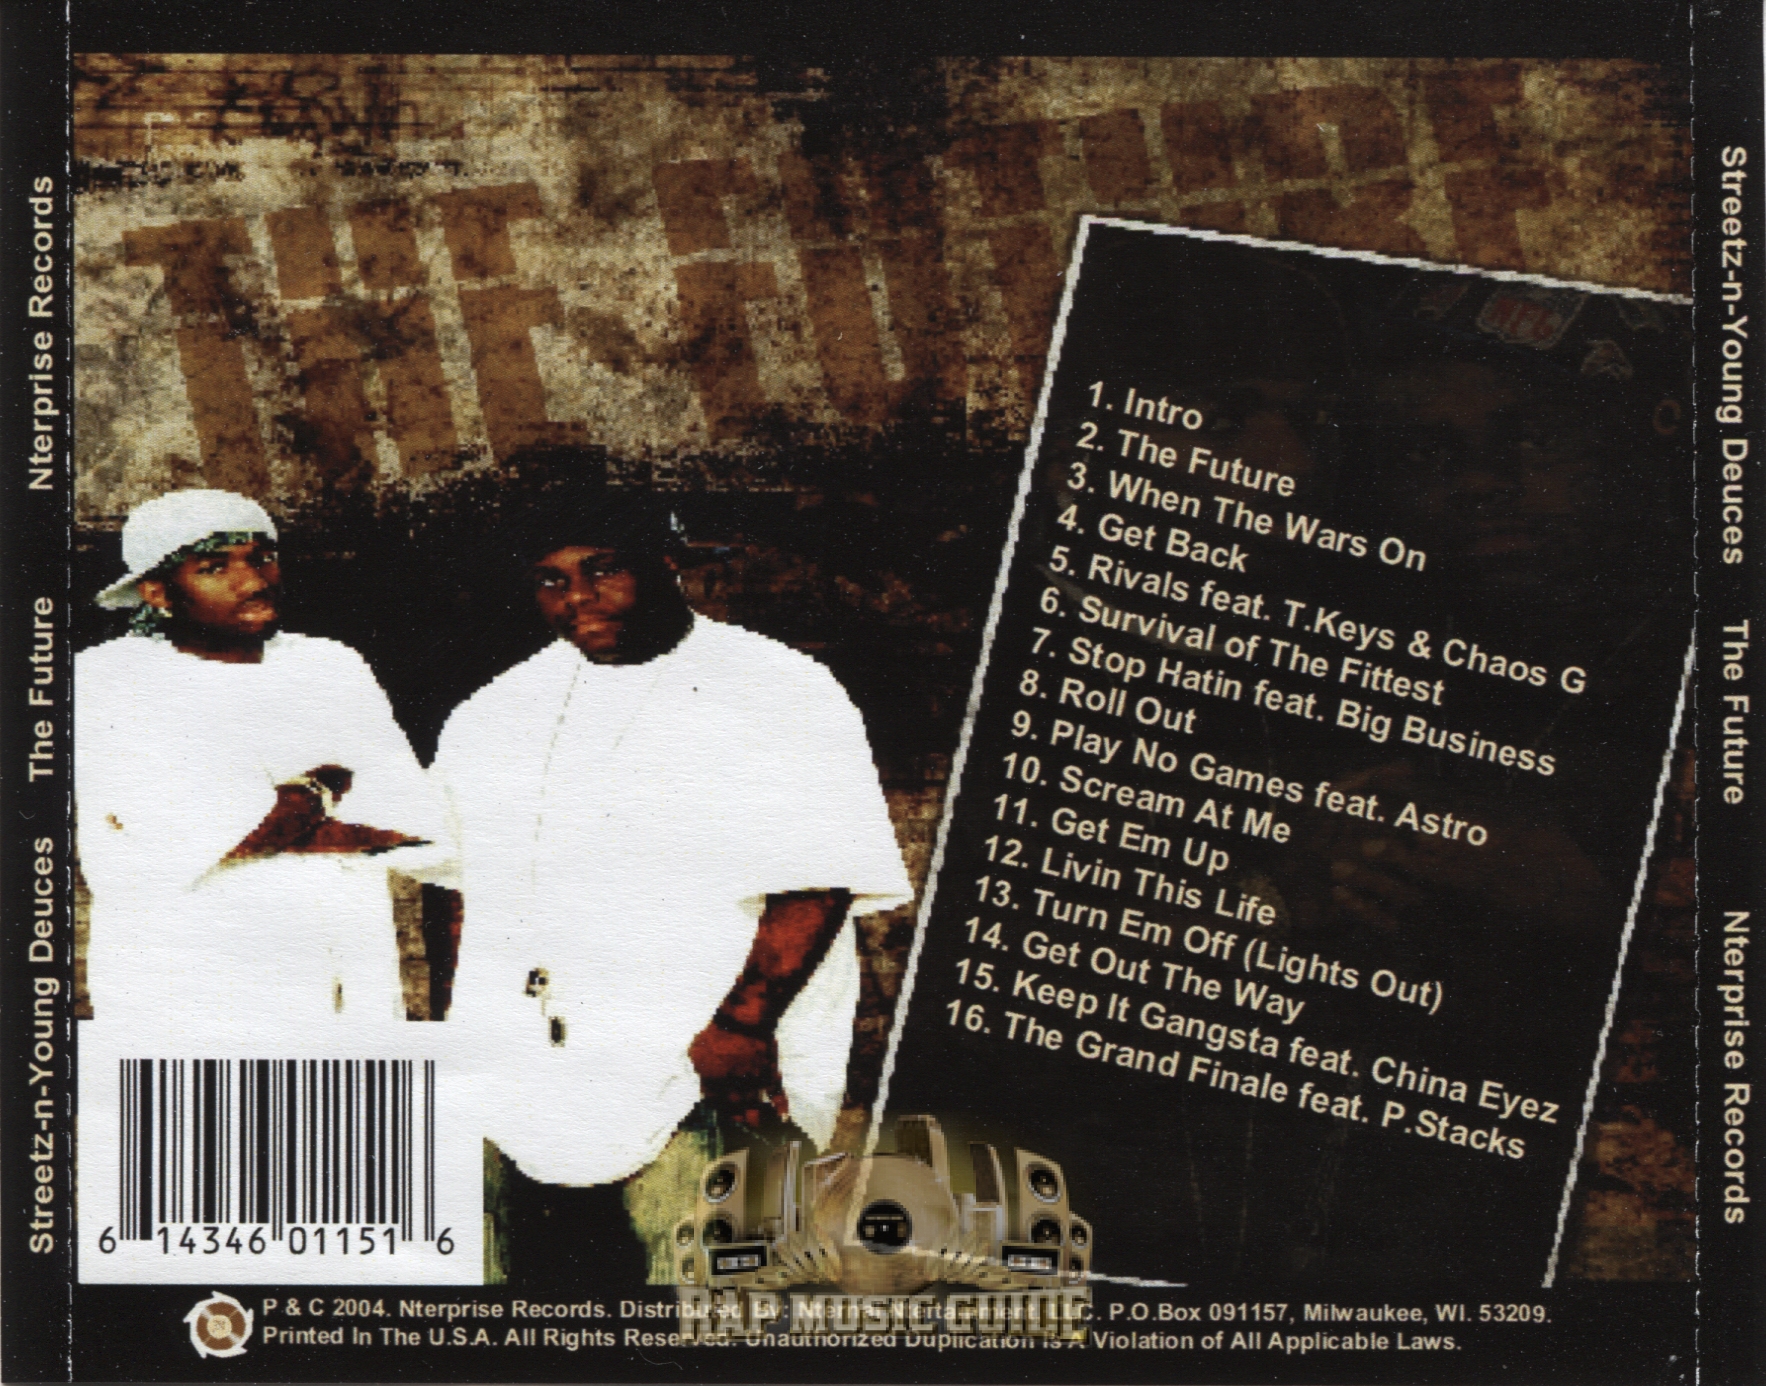 Streetz-N-Young Deuces - The Future: CD | Rap Music Guide